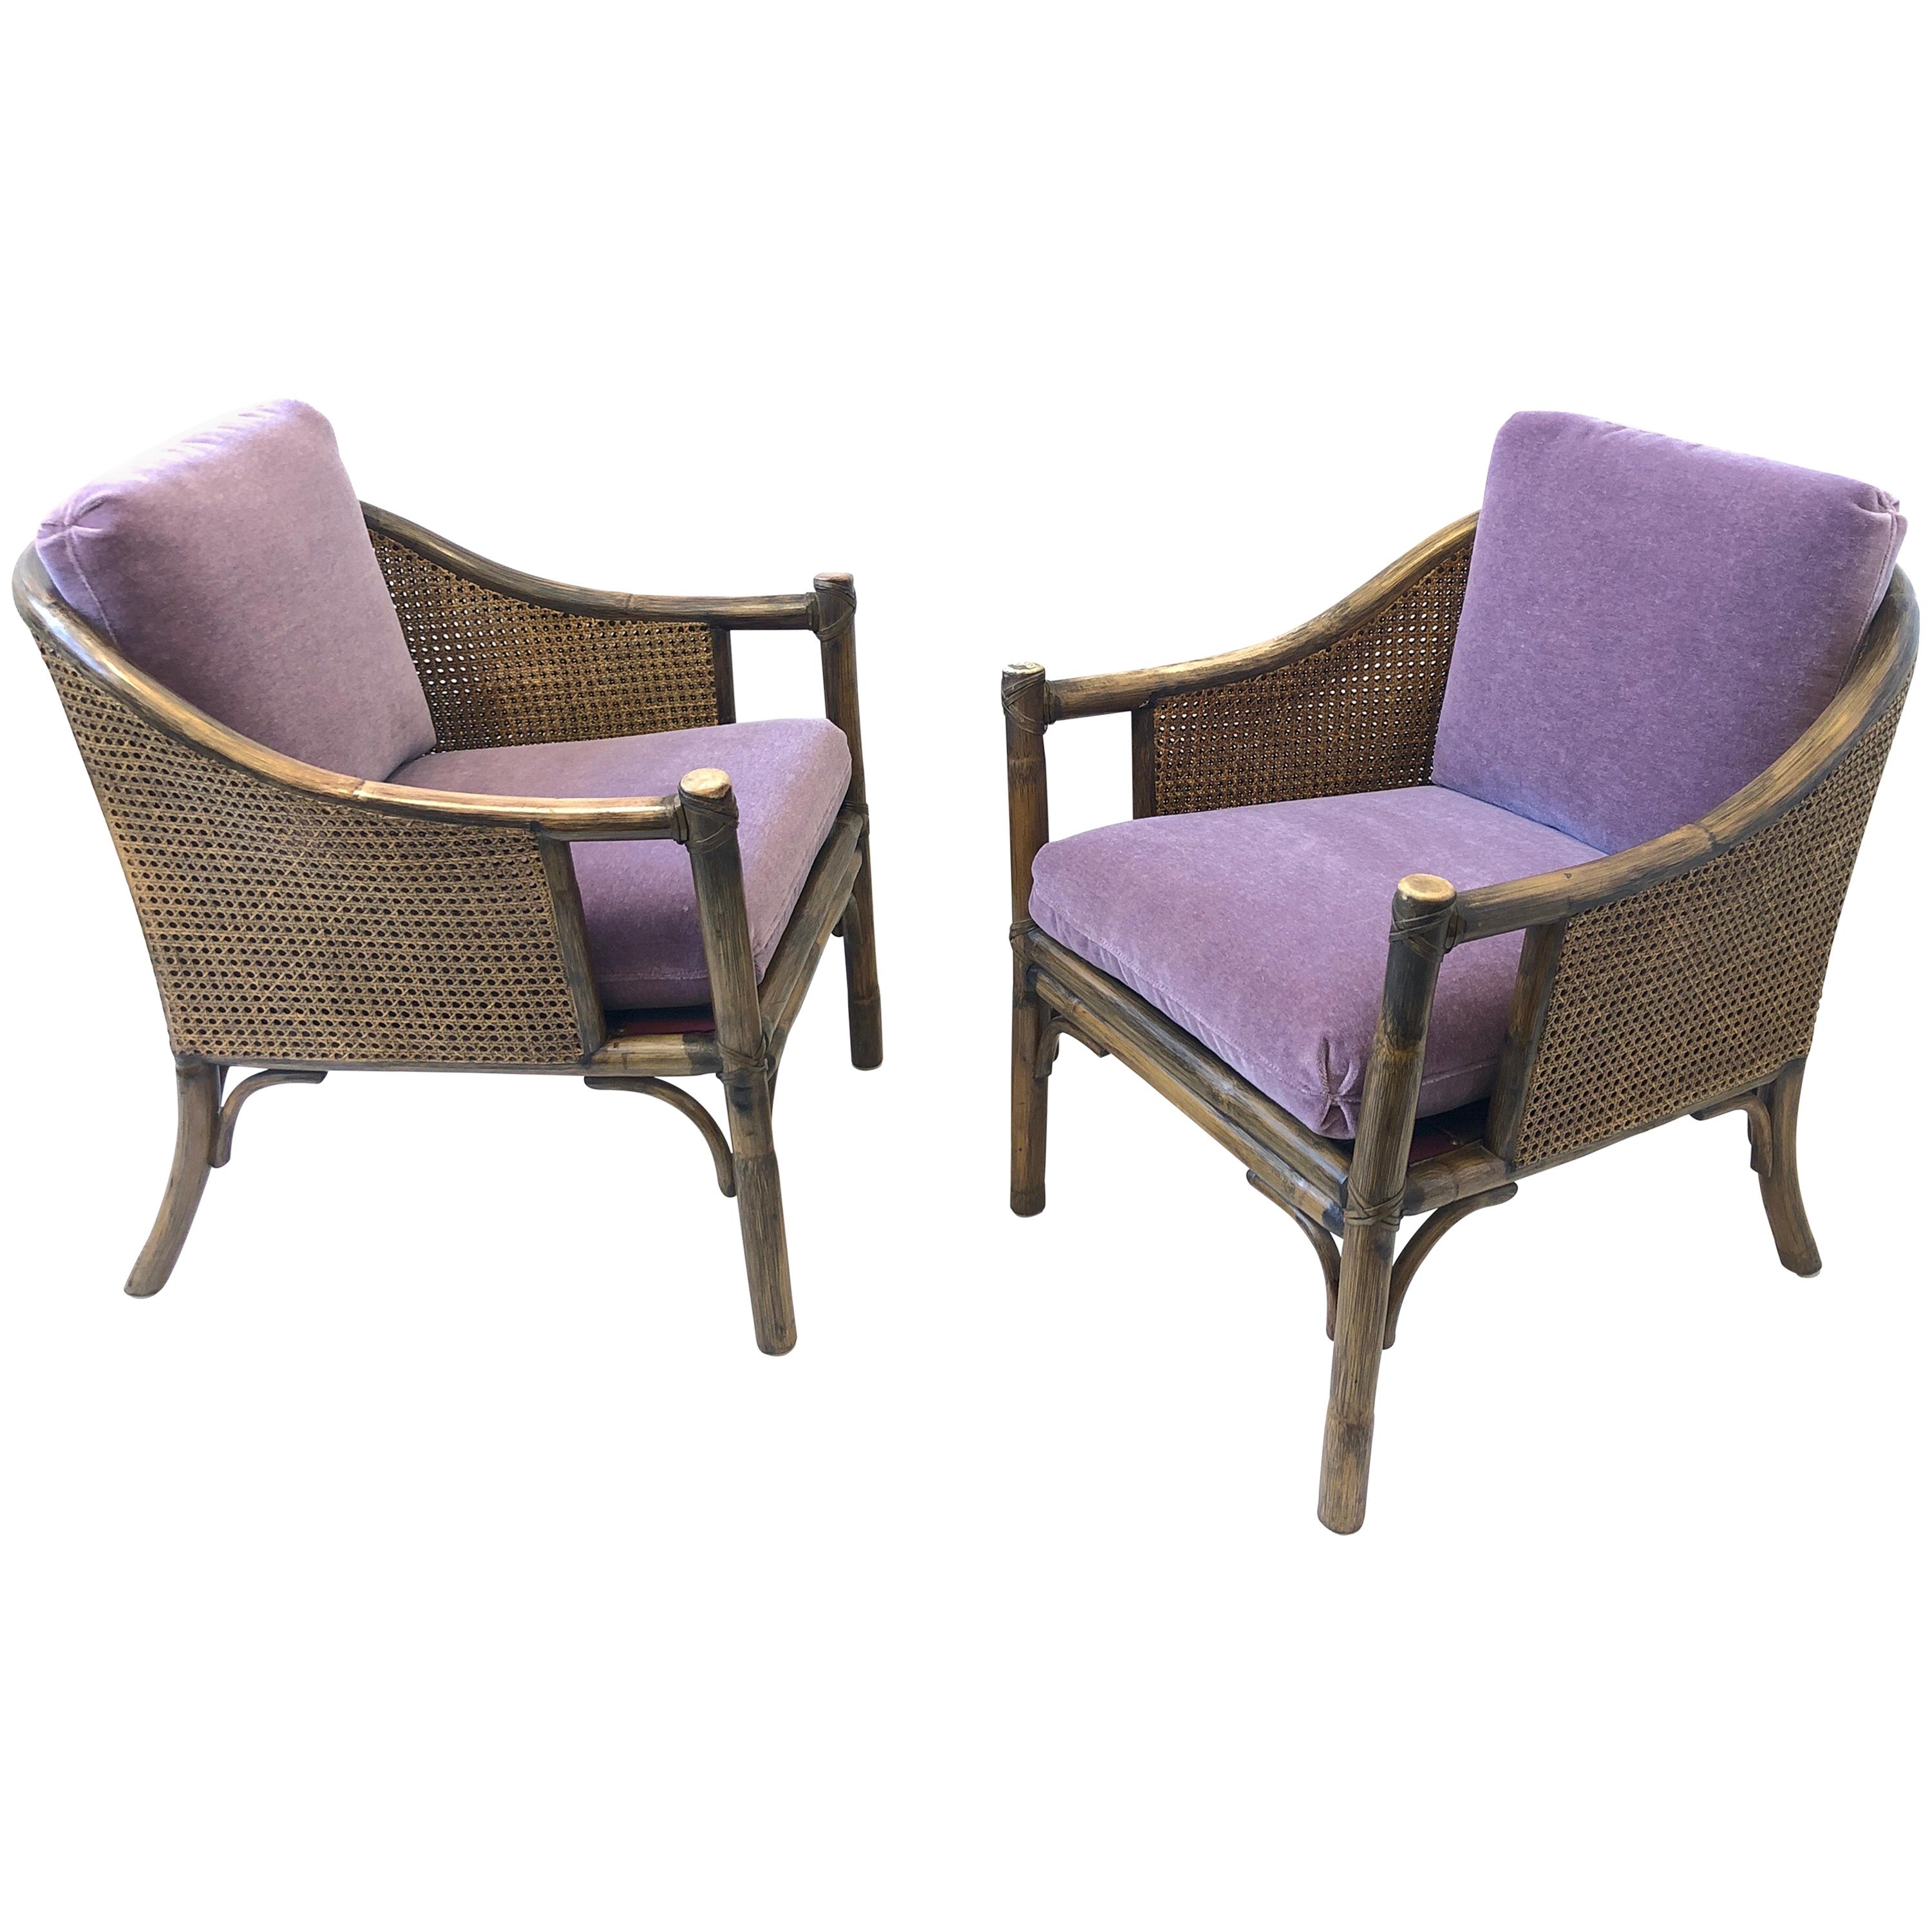 Pair of Bamboo and Cane Lounge Chairs by McGuire